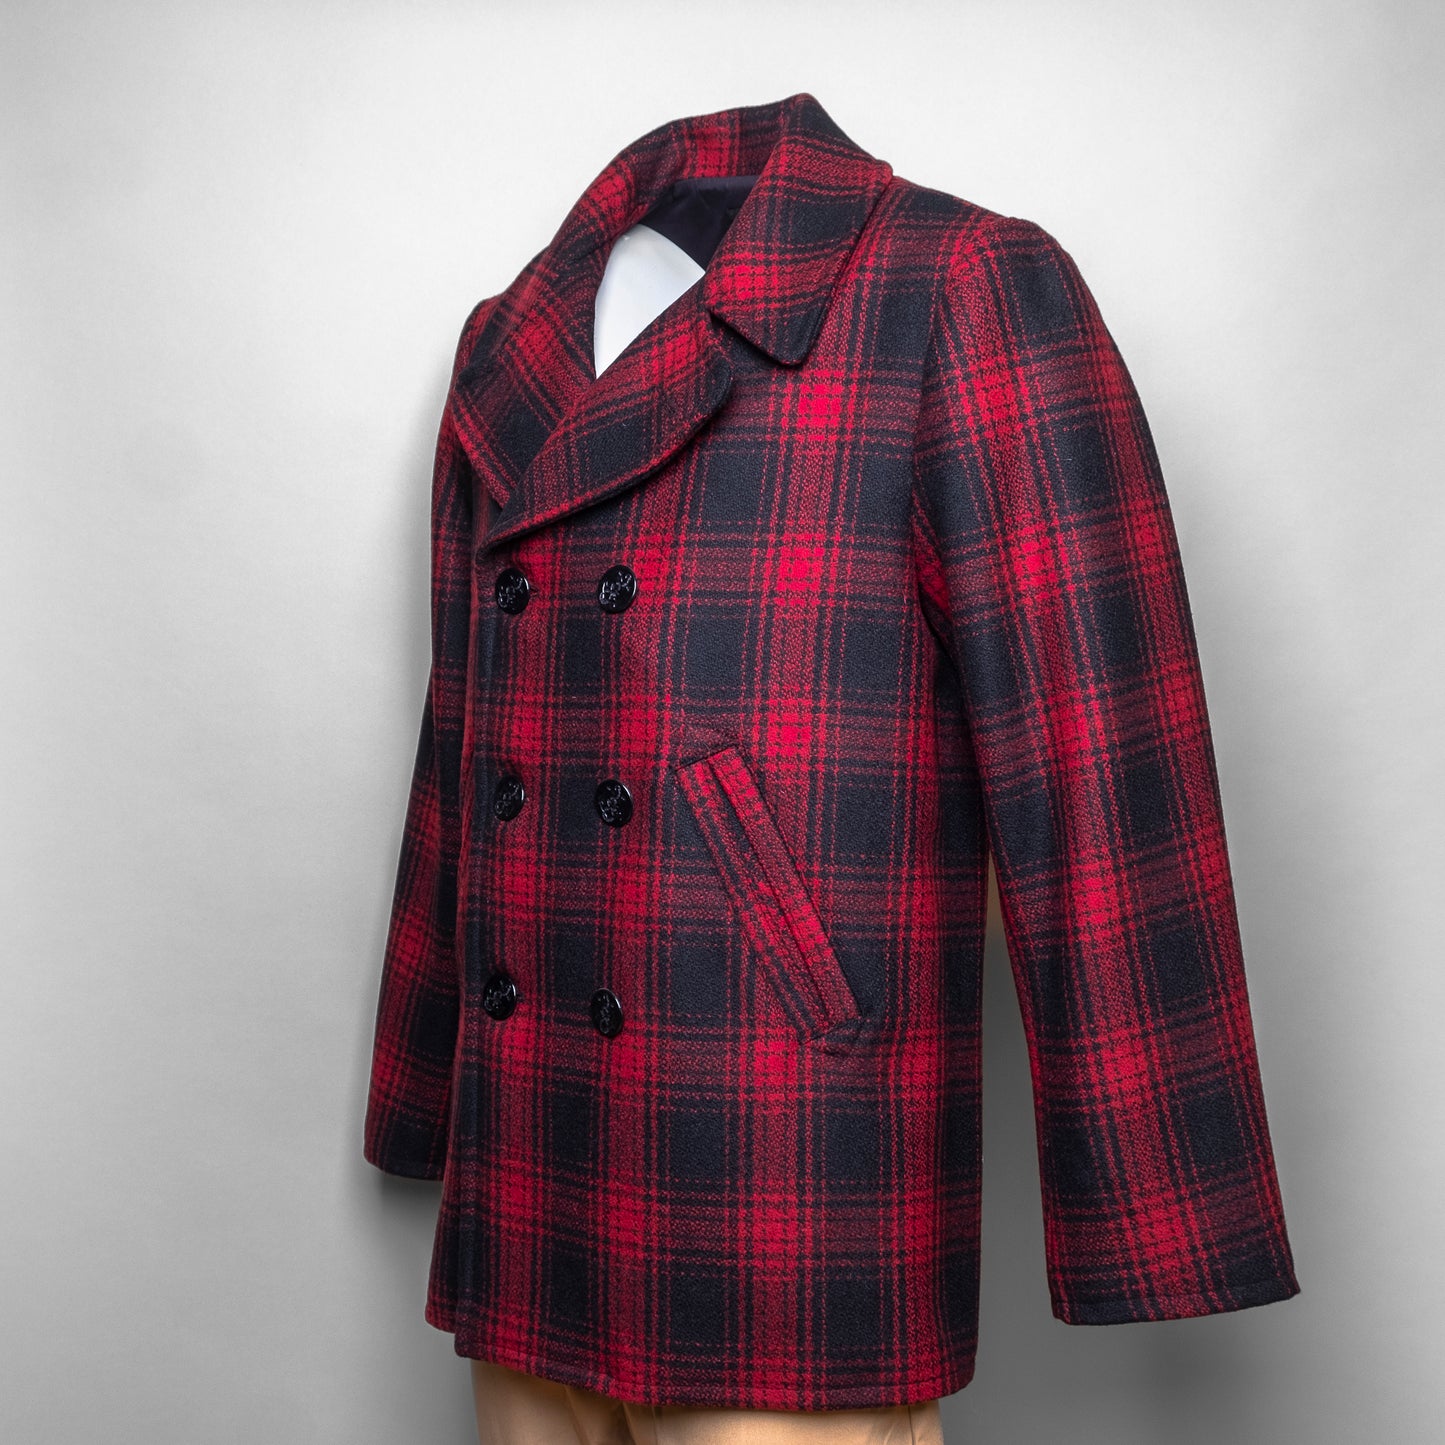 PIKE BROTHERS - 1938 PEA COAT Red Check WOOL